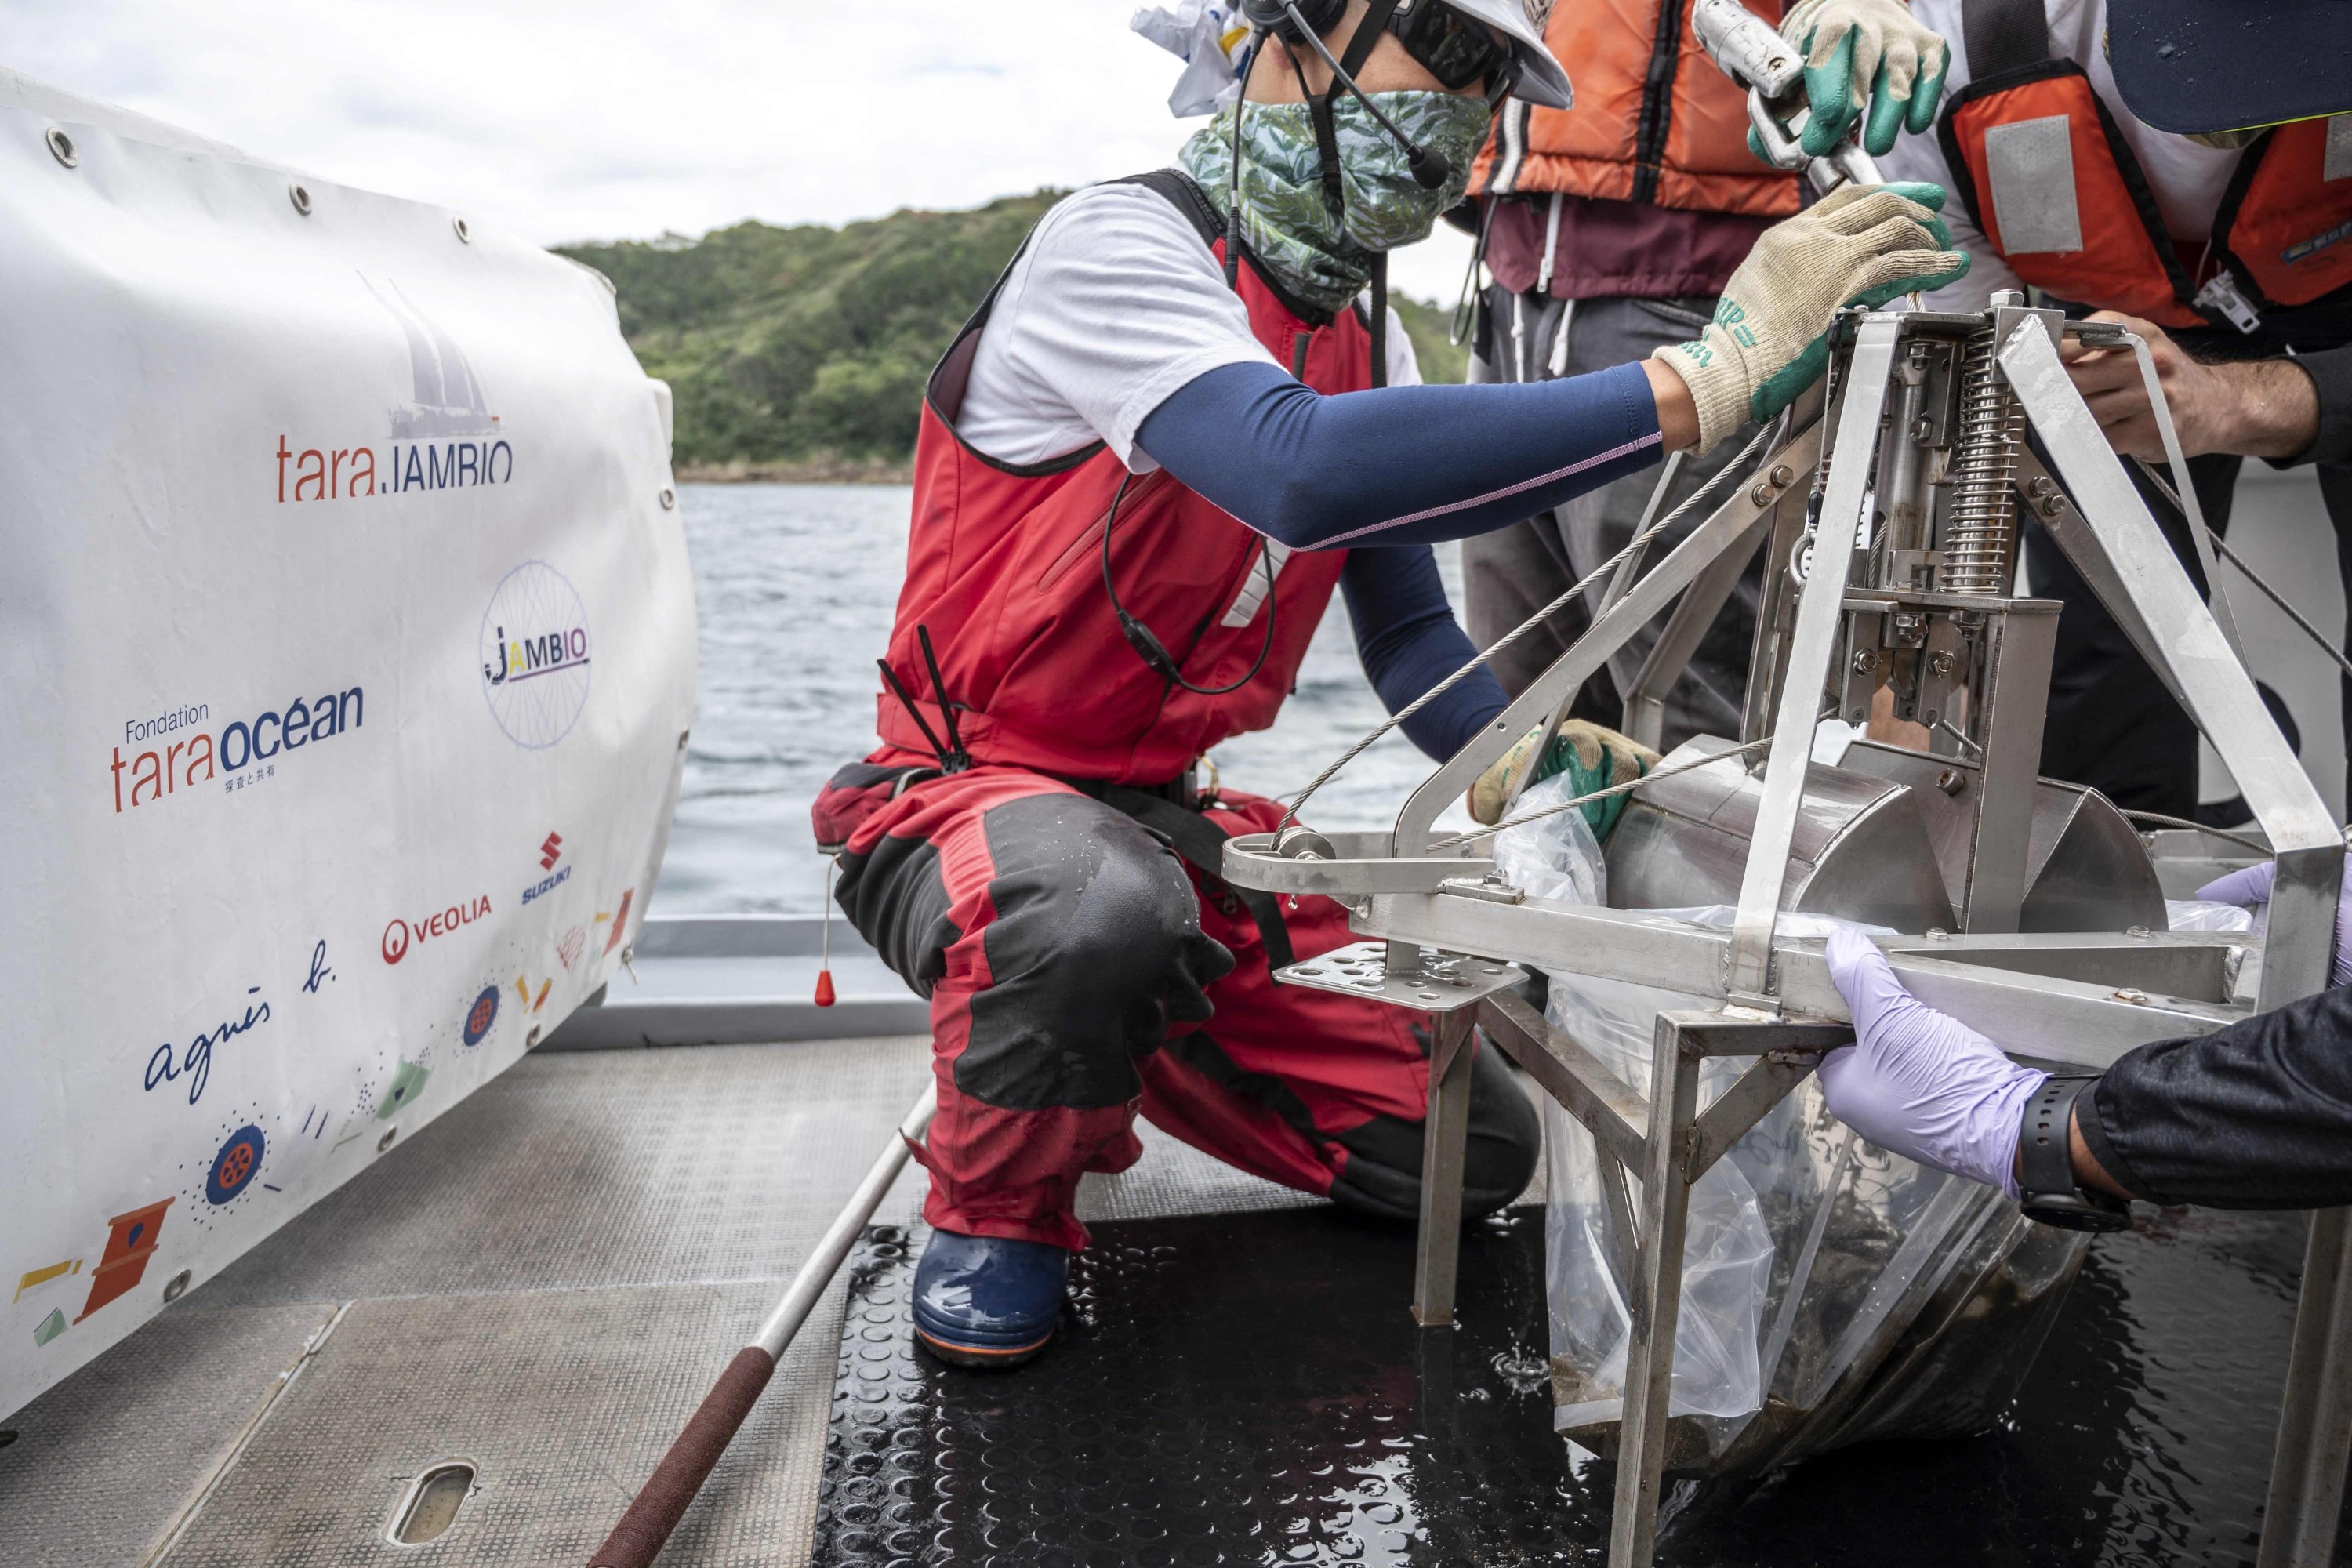 Researchers prepare to take sediment samples collected from a "Smith-McIntyre" grab machine during a joint project of the French Tara Ocean Foundation and Japanese marine-station network Jambio, onboard a boat off the coast of Shimoda, Shizuoka Prefecture, Japan, Oct. 14, 2021. (AFP Photo)